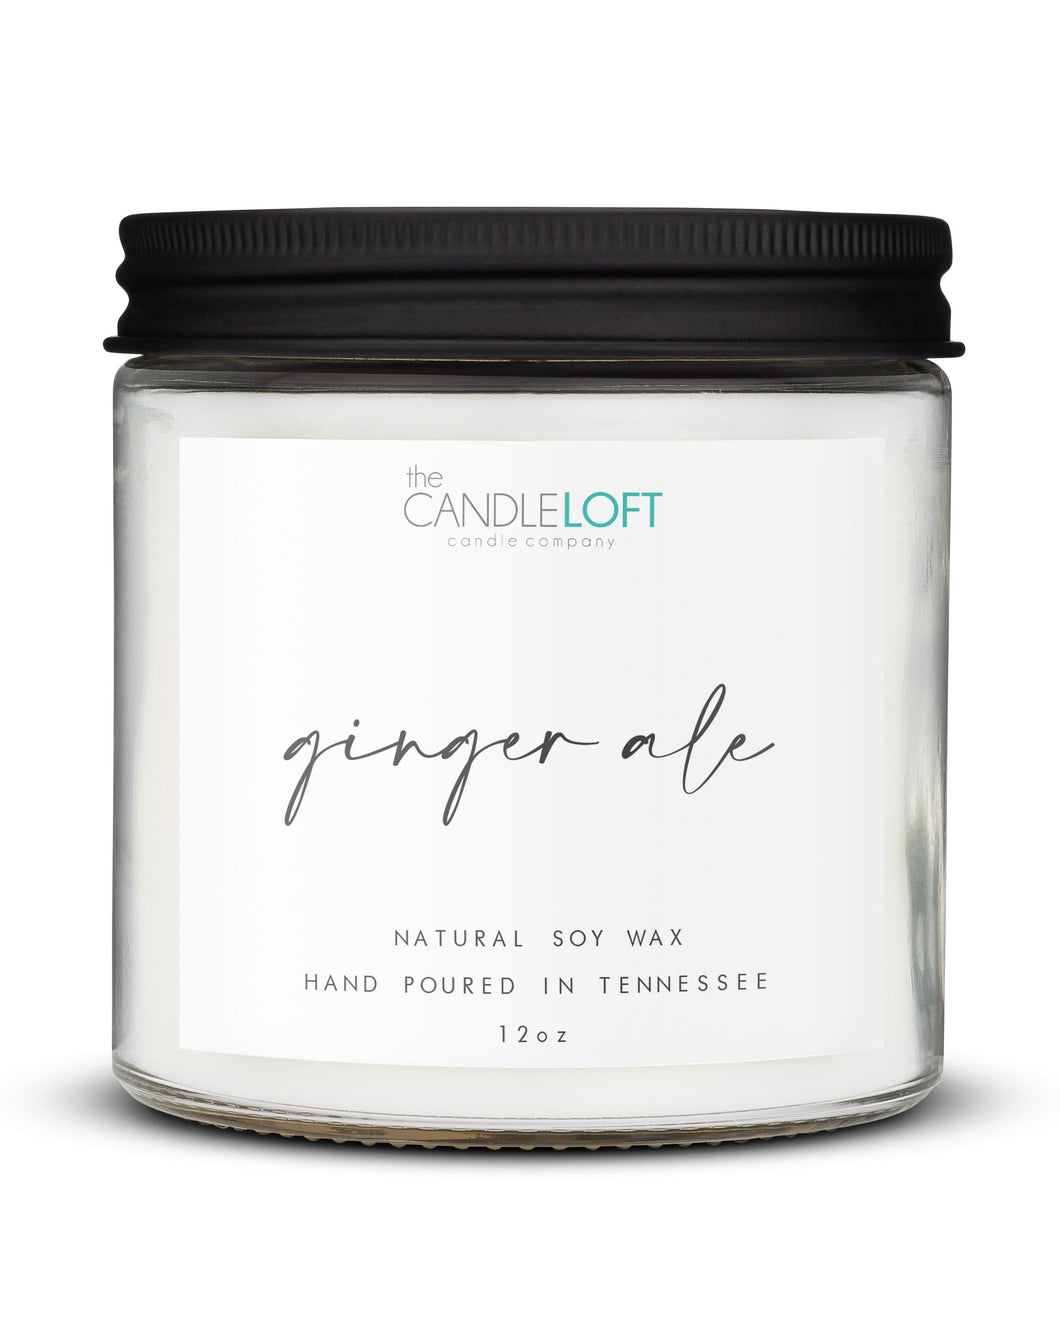 The Candle Loft Candles Signature 12oz Ginger Ale Candle